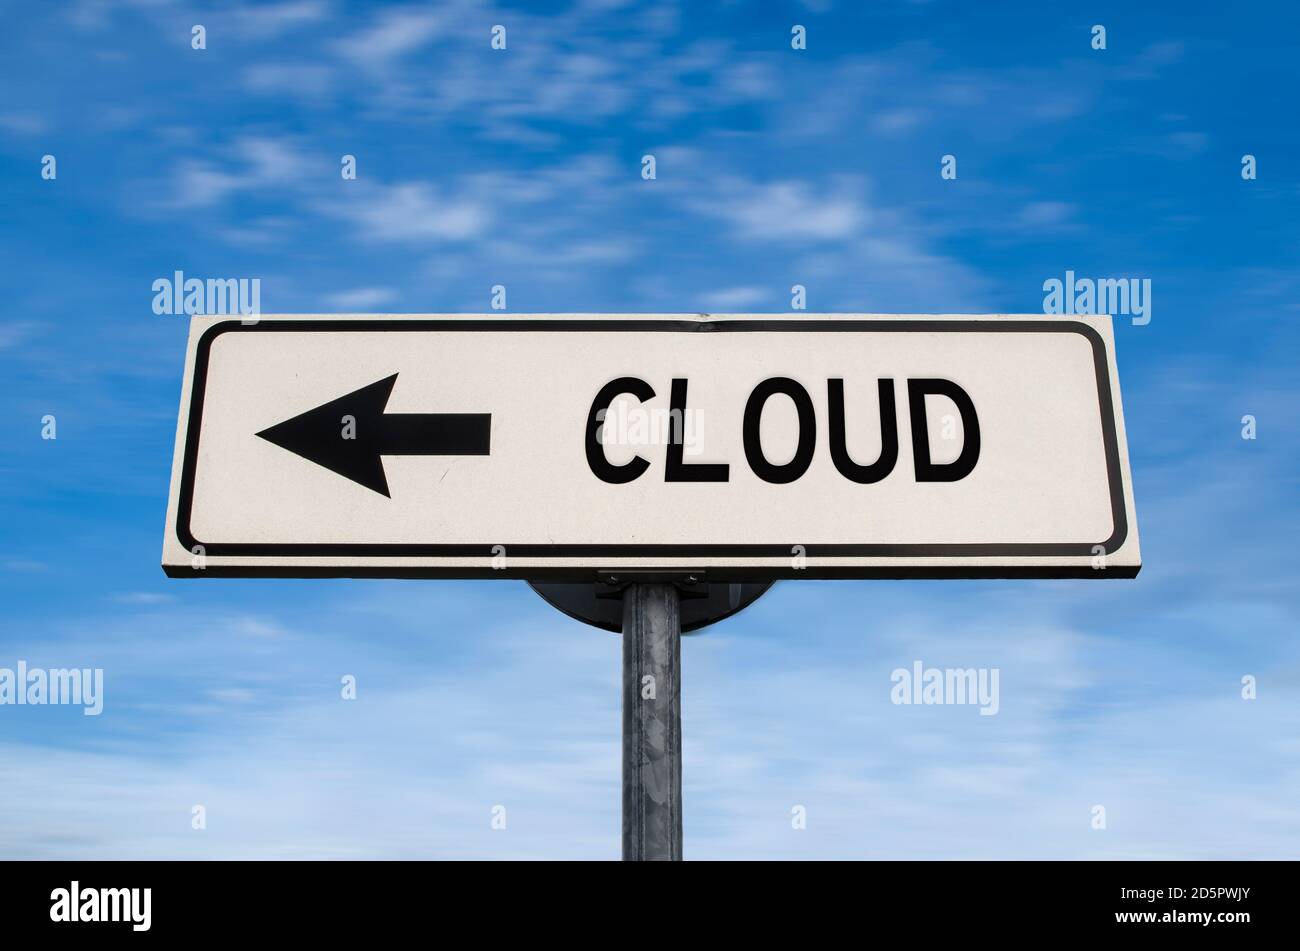 Cloud road sign, arrow on blue sky background. One way blank road sign with copy space. Arrow on a pole pointing in one direction. Stock Photo